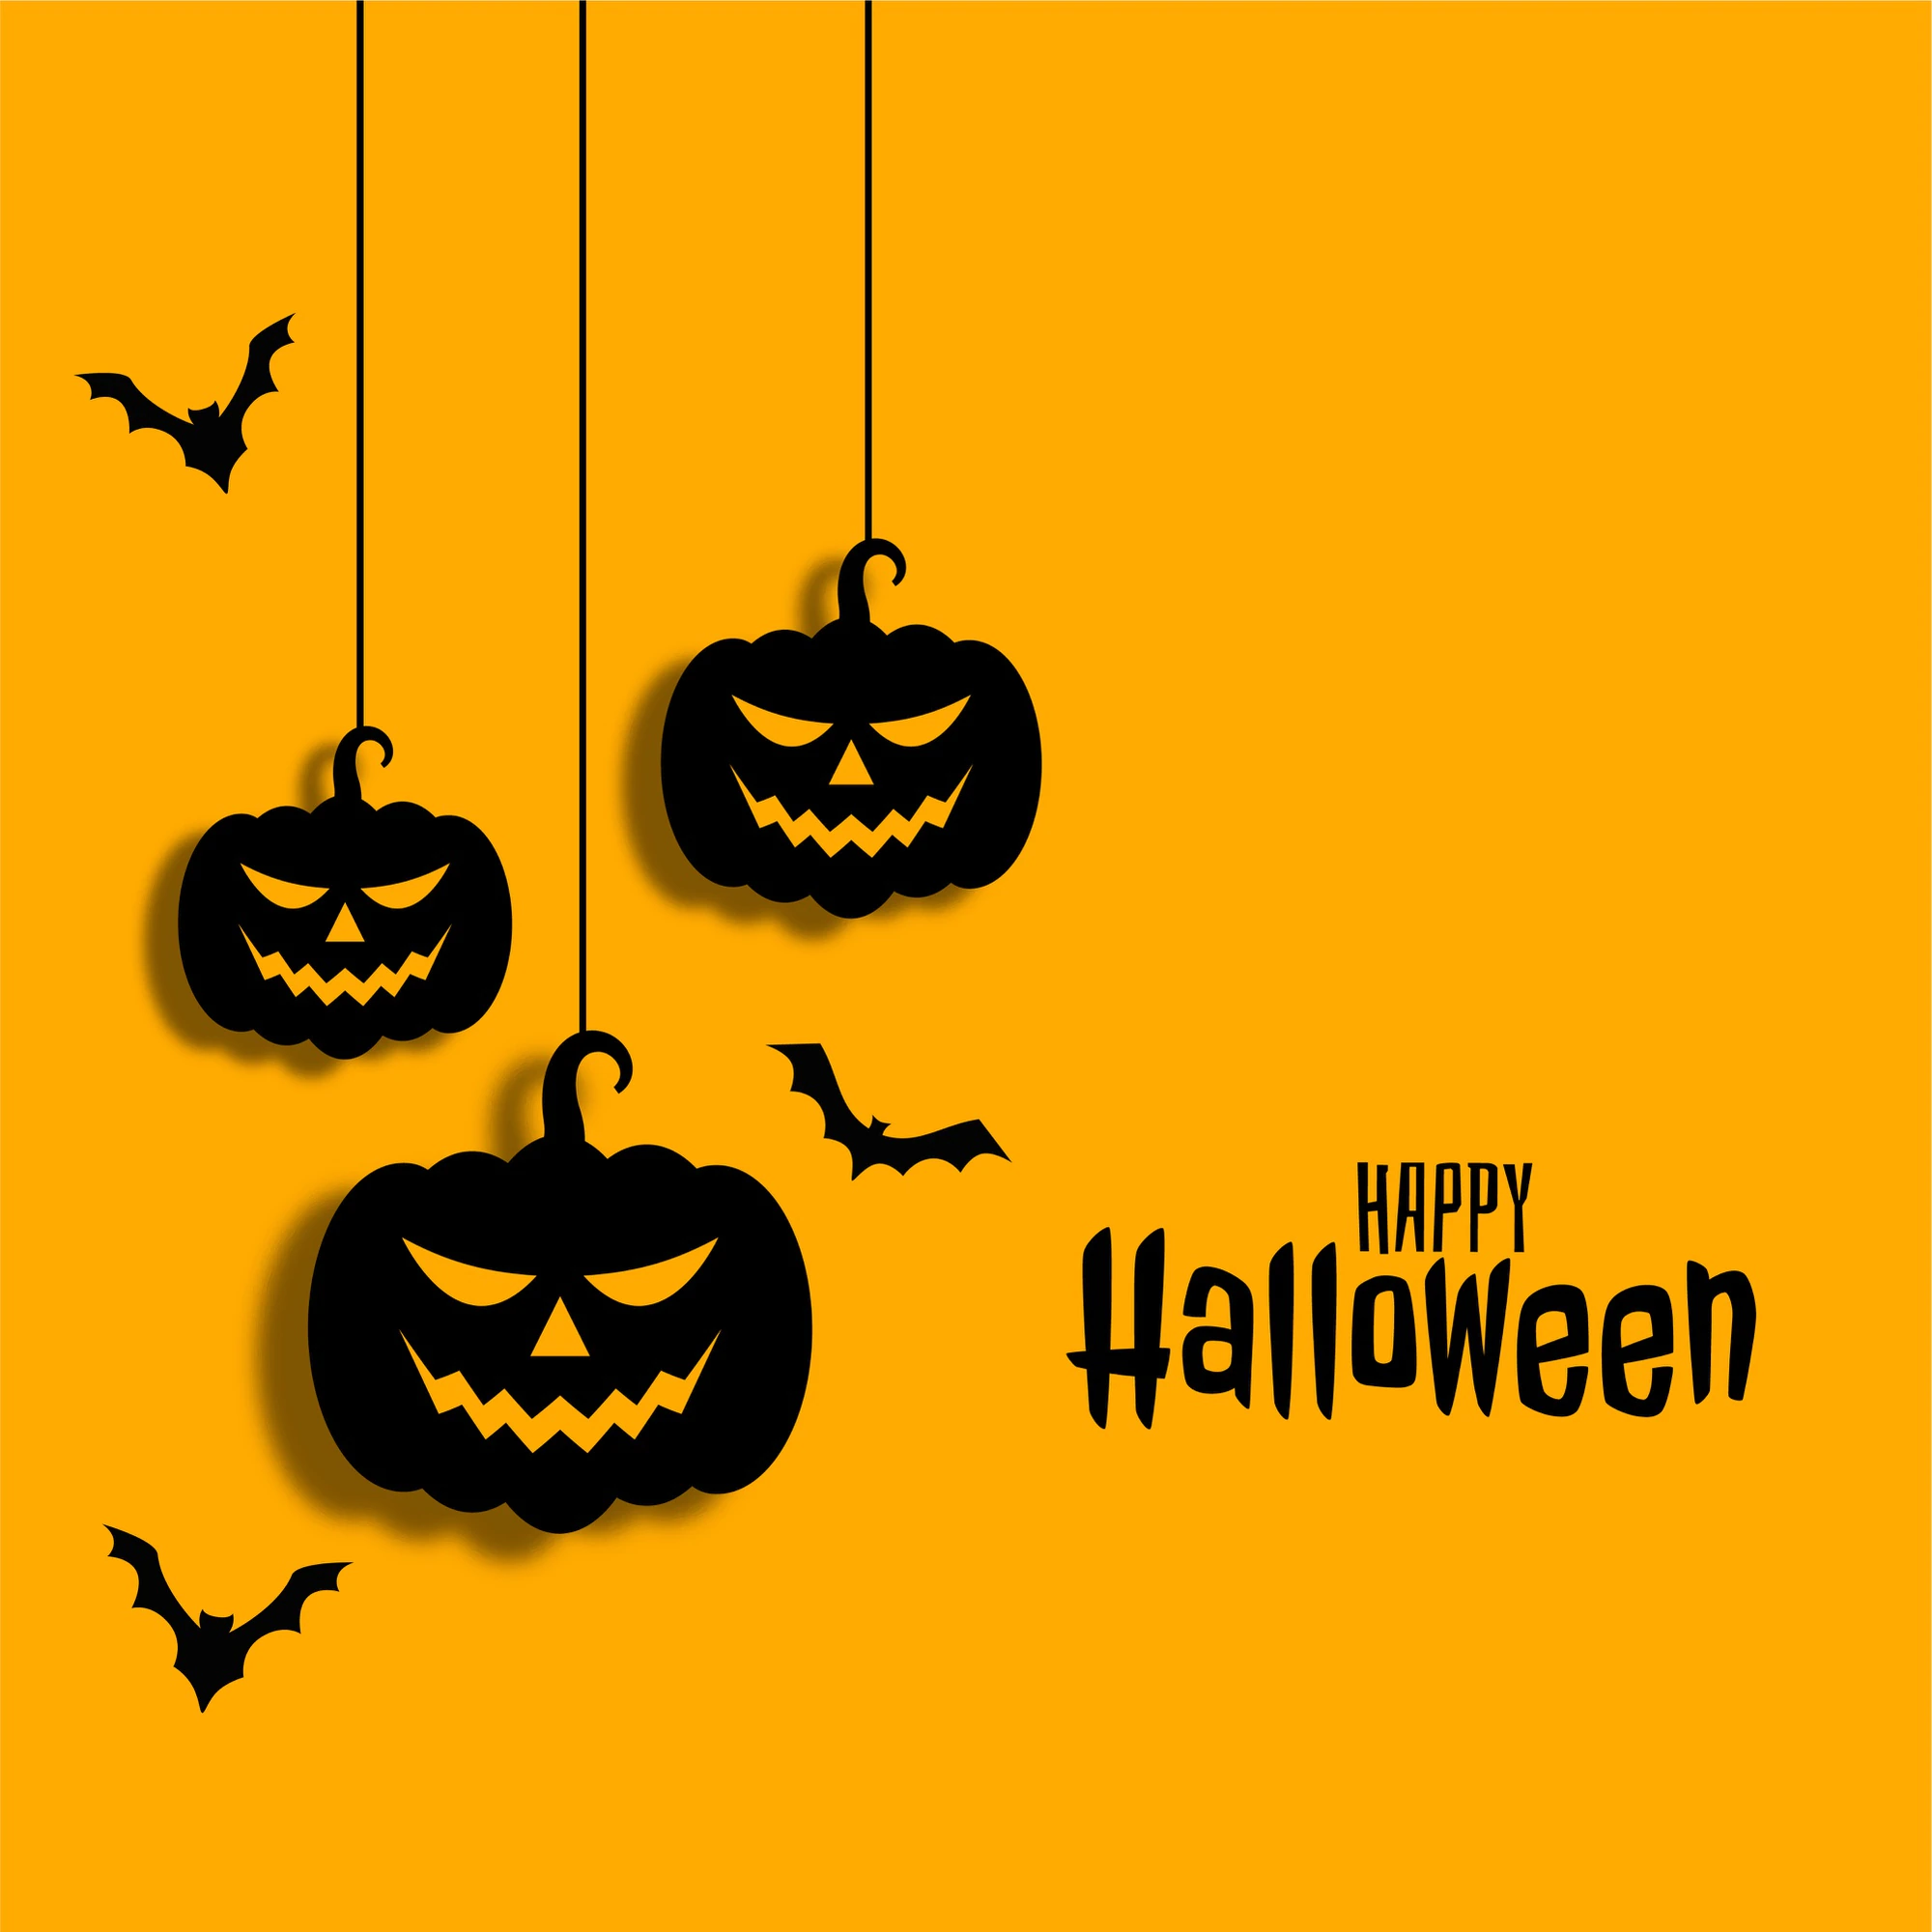 Happy Halloween 2022 Wishes for Grandson, Quotes, Sayings, Messages, and Greetings to share